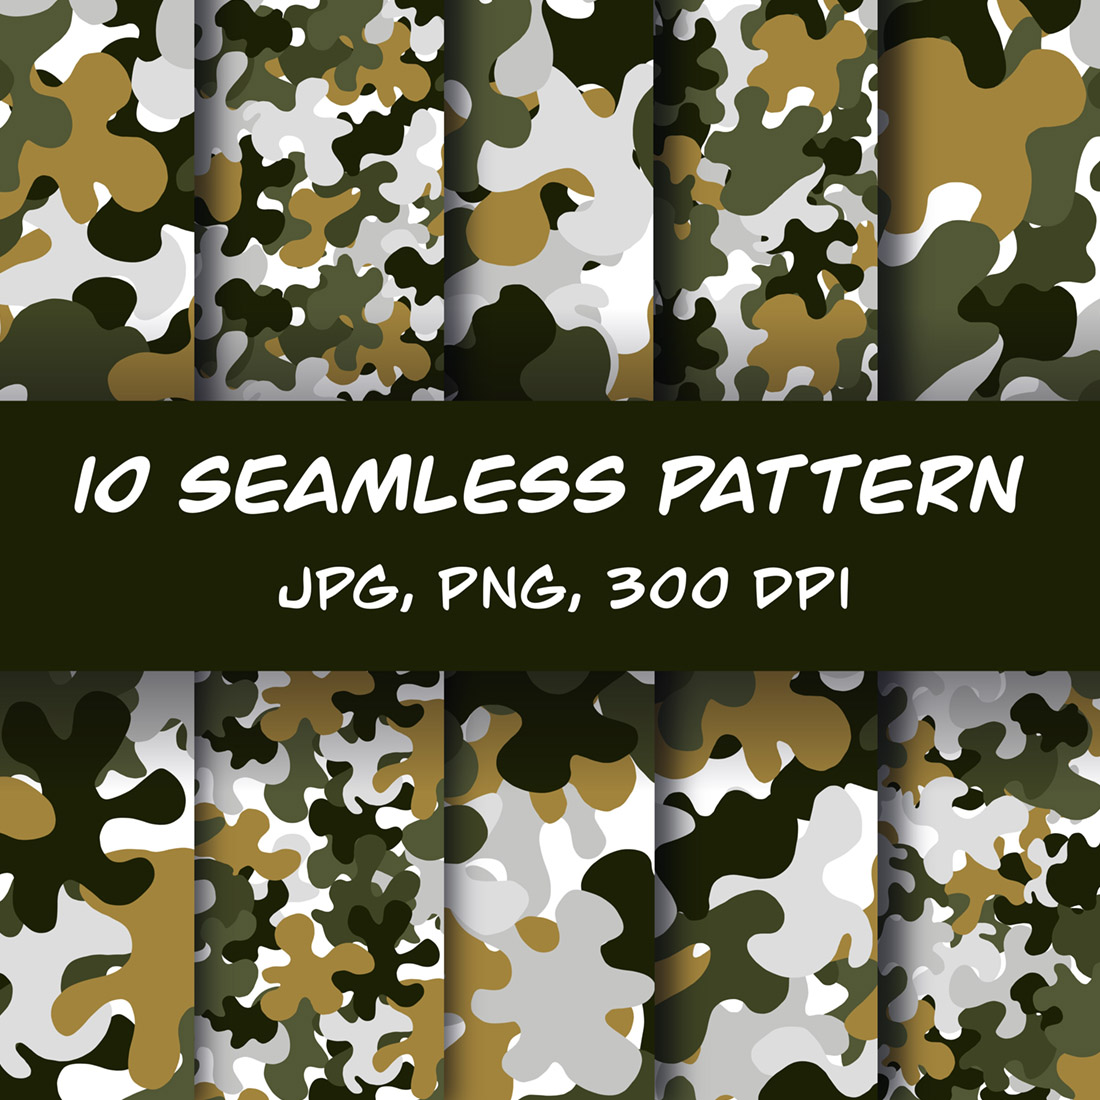 Grey Camo Pattern Poster Size A4 / A3 Camouflage Army Forces Poster Gift  #13120